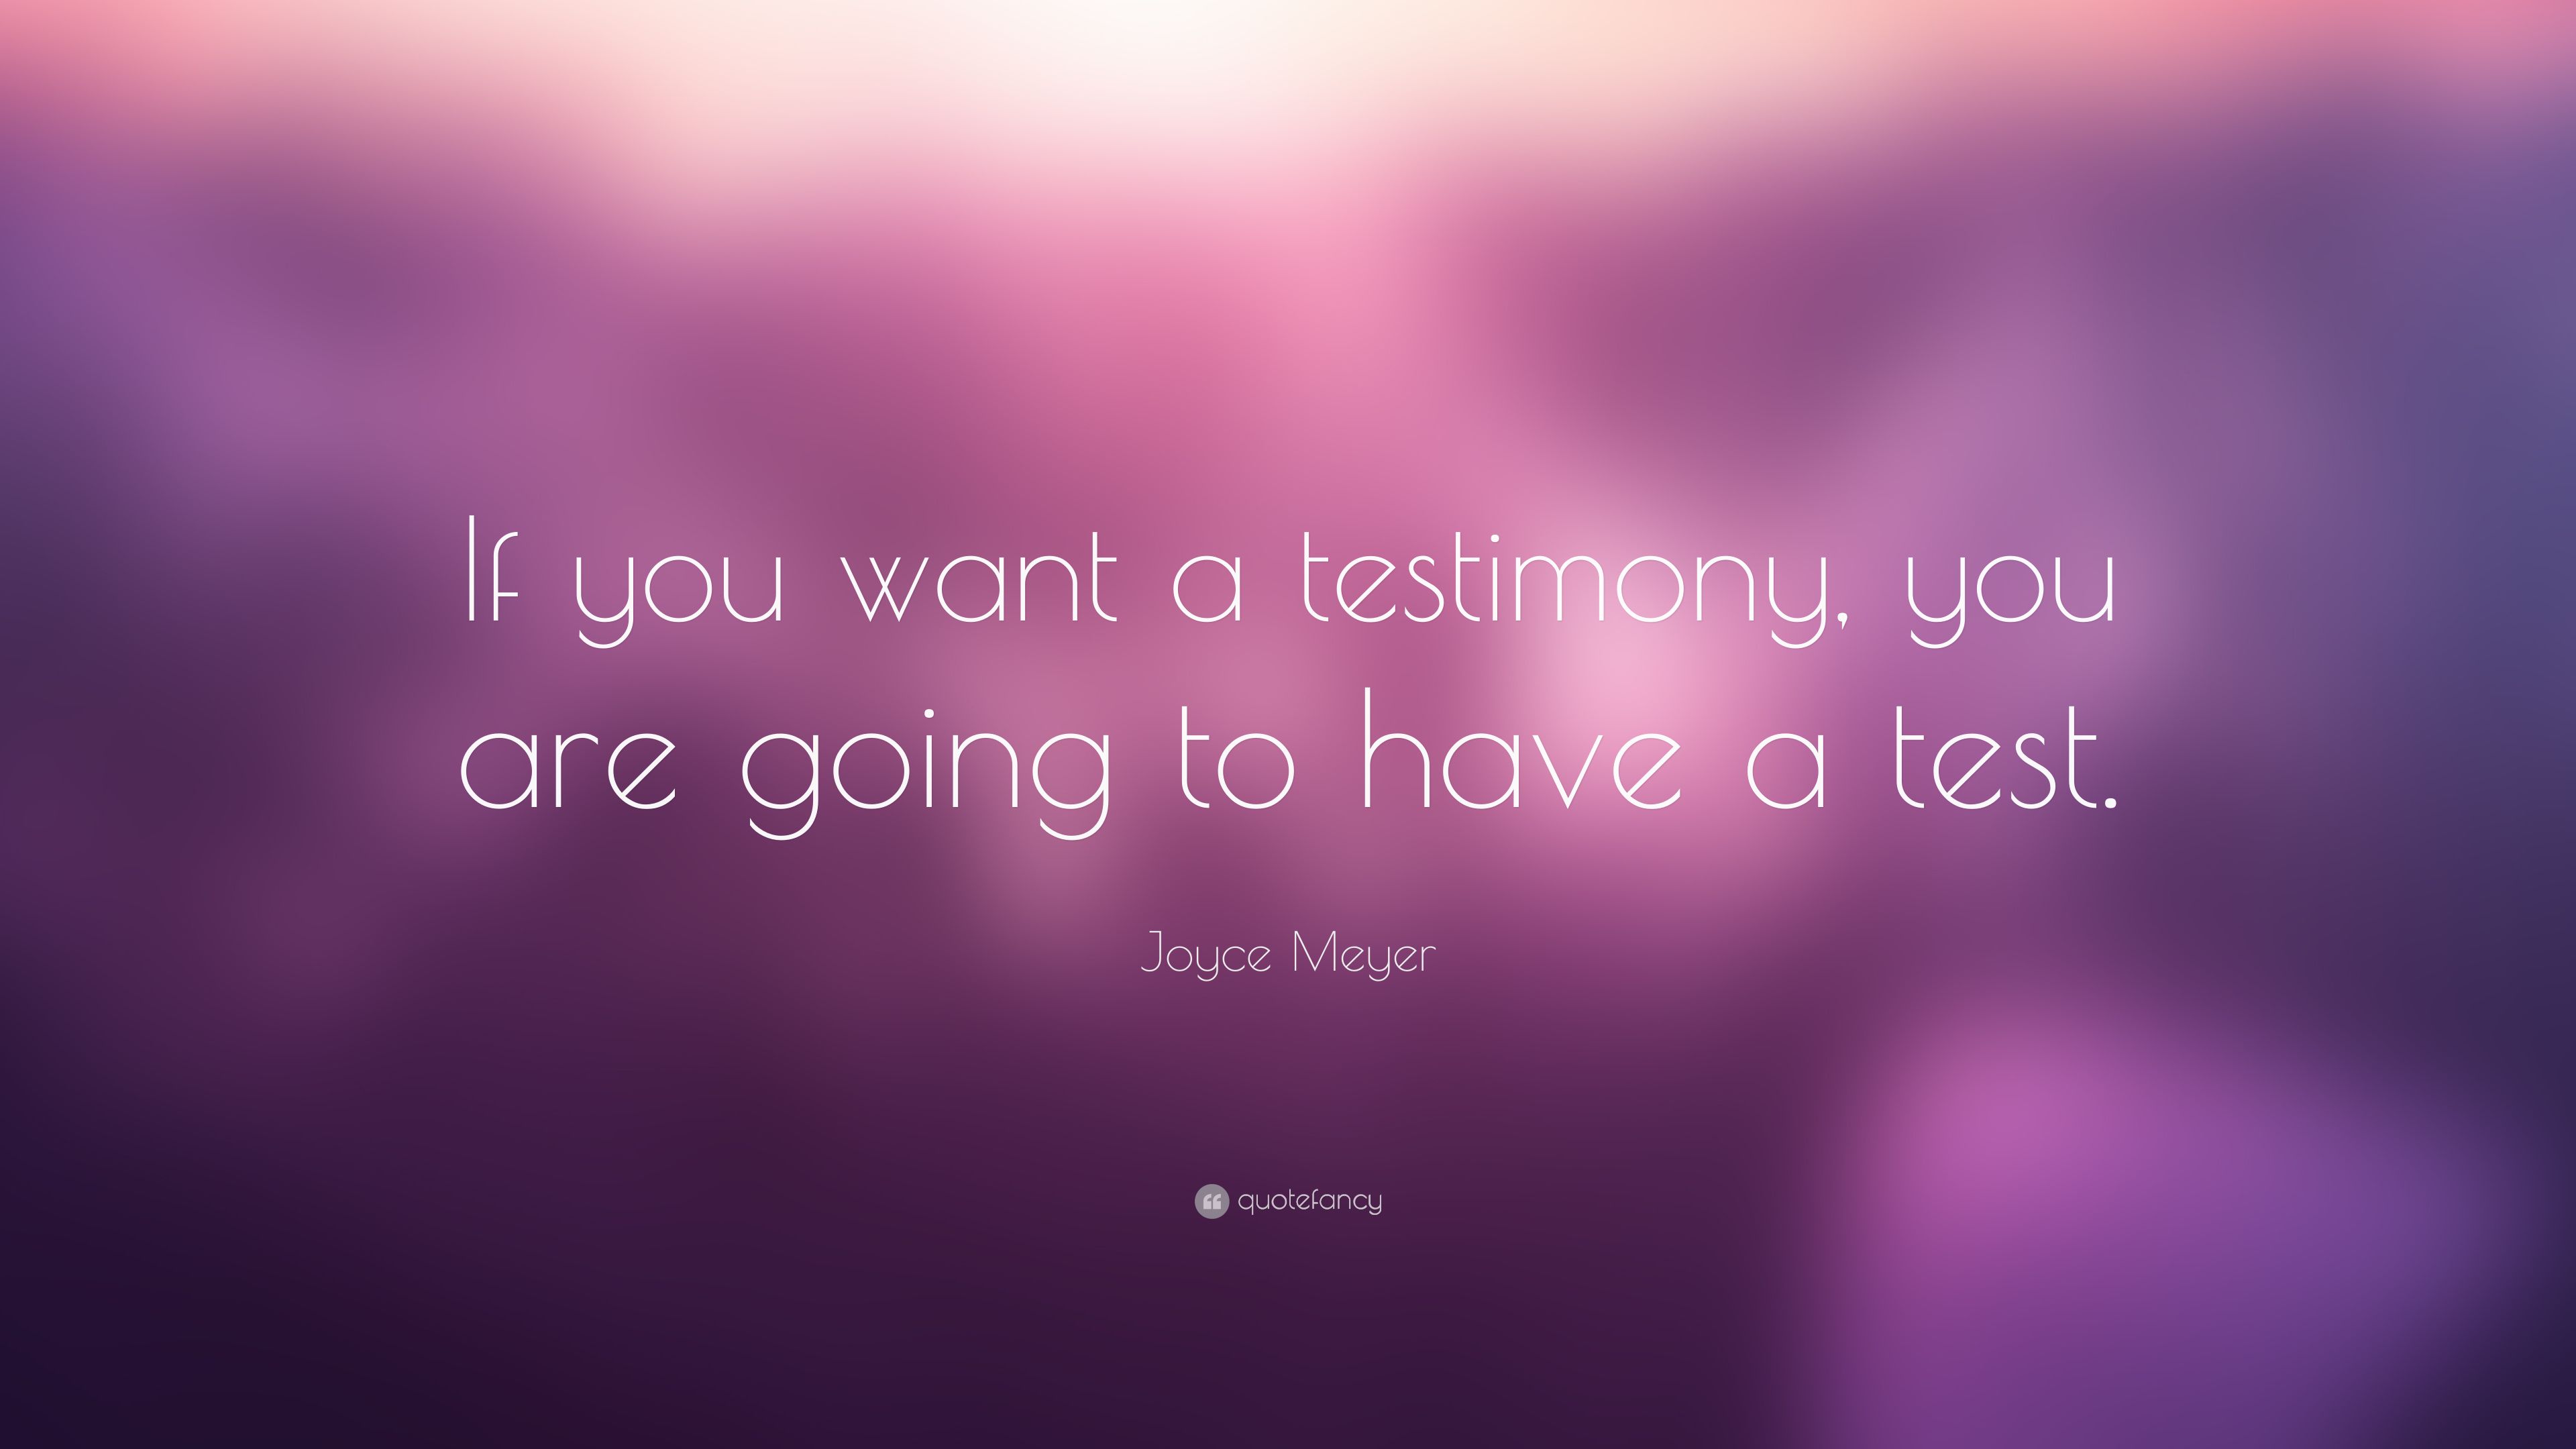 Joyce Meyer Quote: “If you want a testimony, you are going to have a test.” (7 wallpaper)